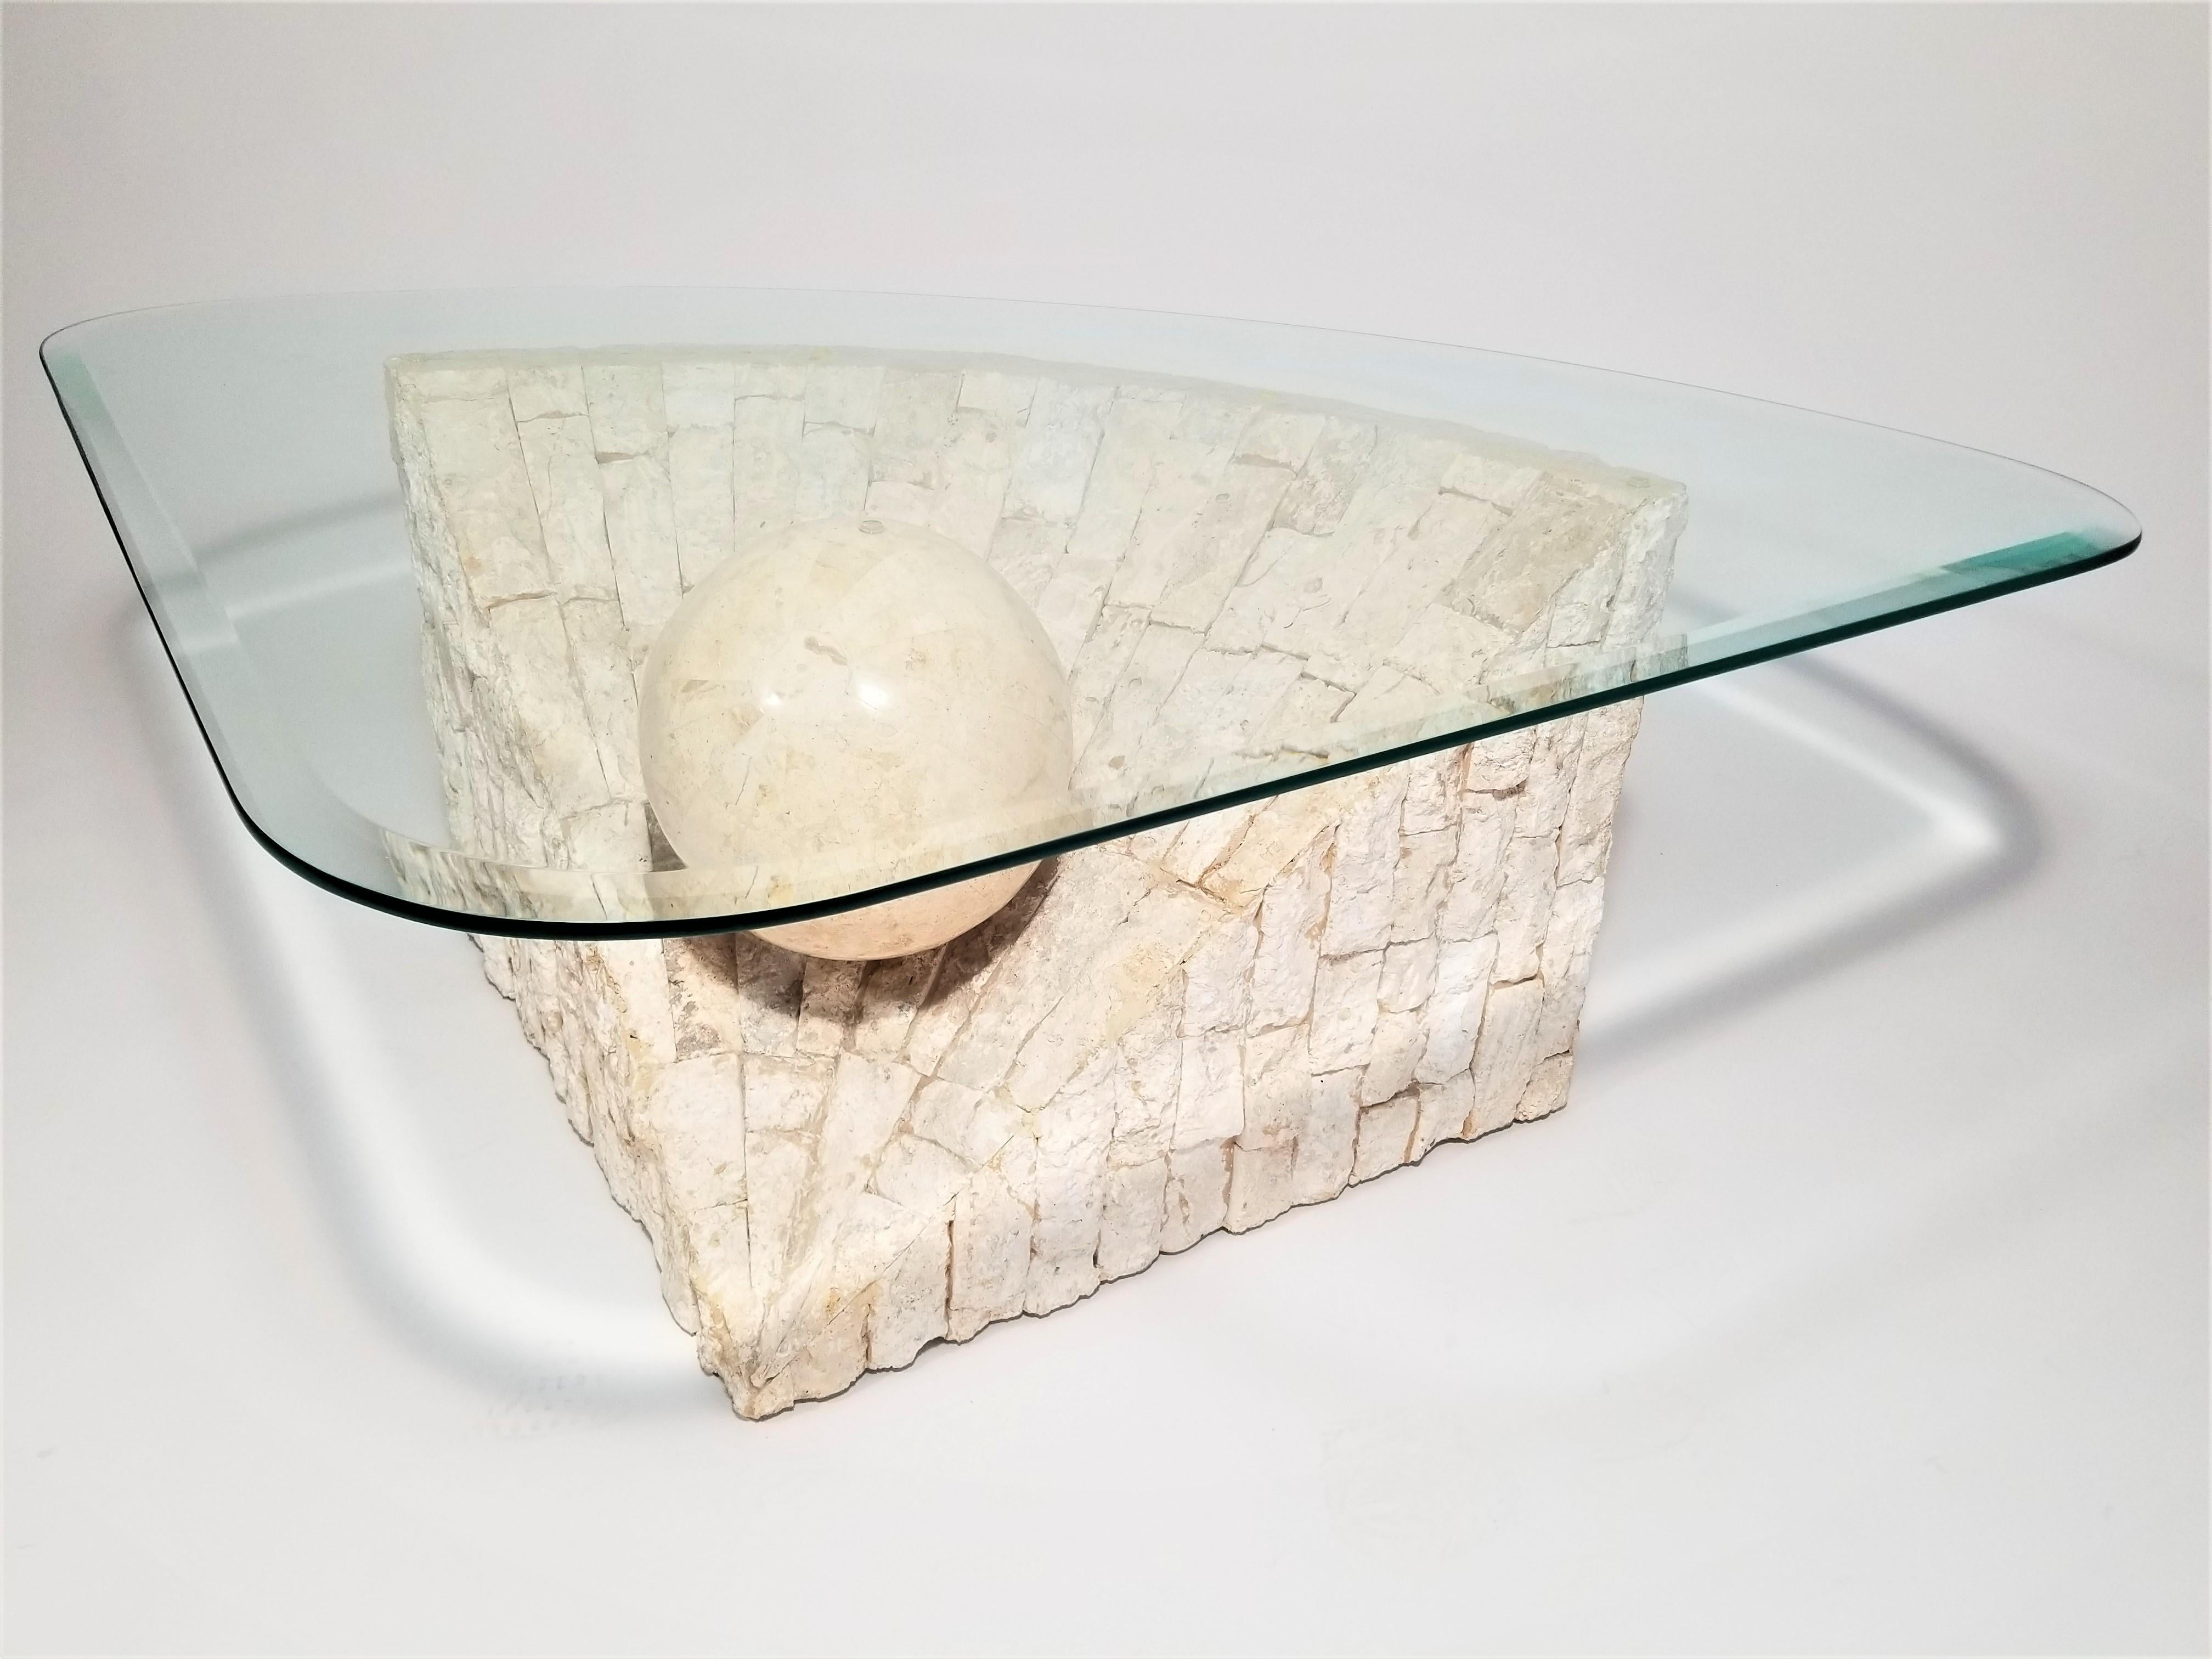 Tessellated Sculptural Glass and Stone Geometric Coffee Table or End Table 12